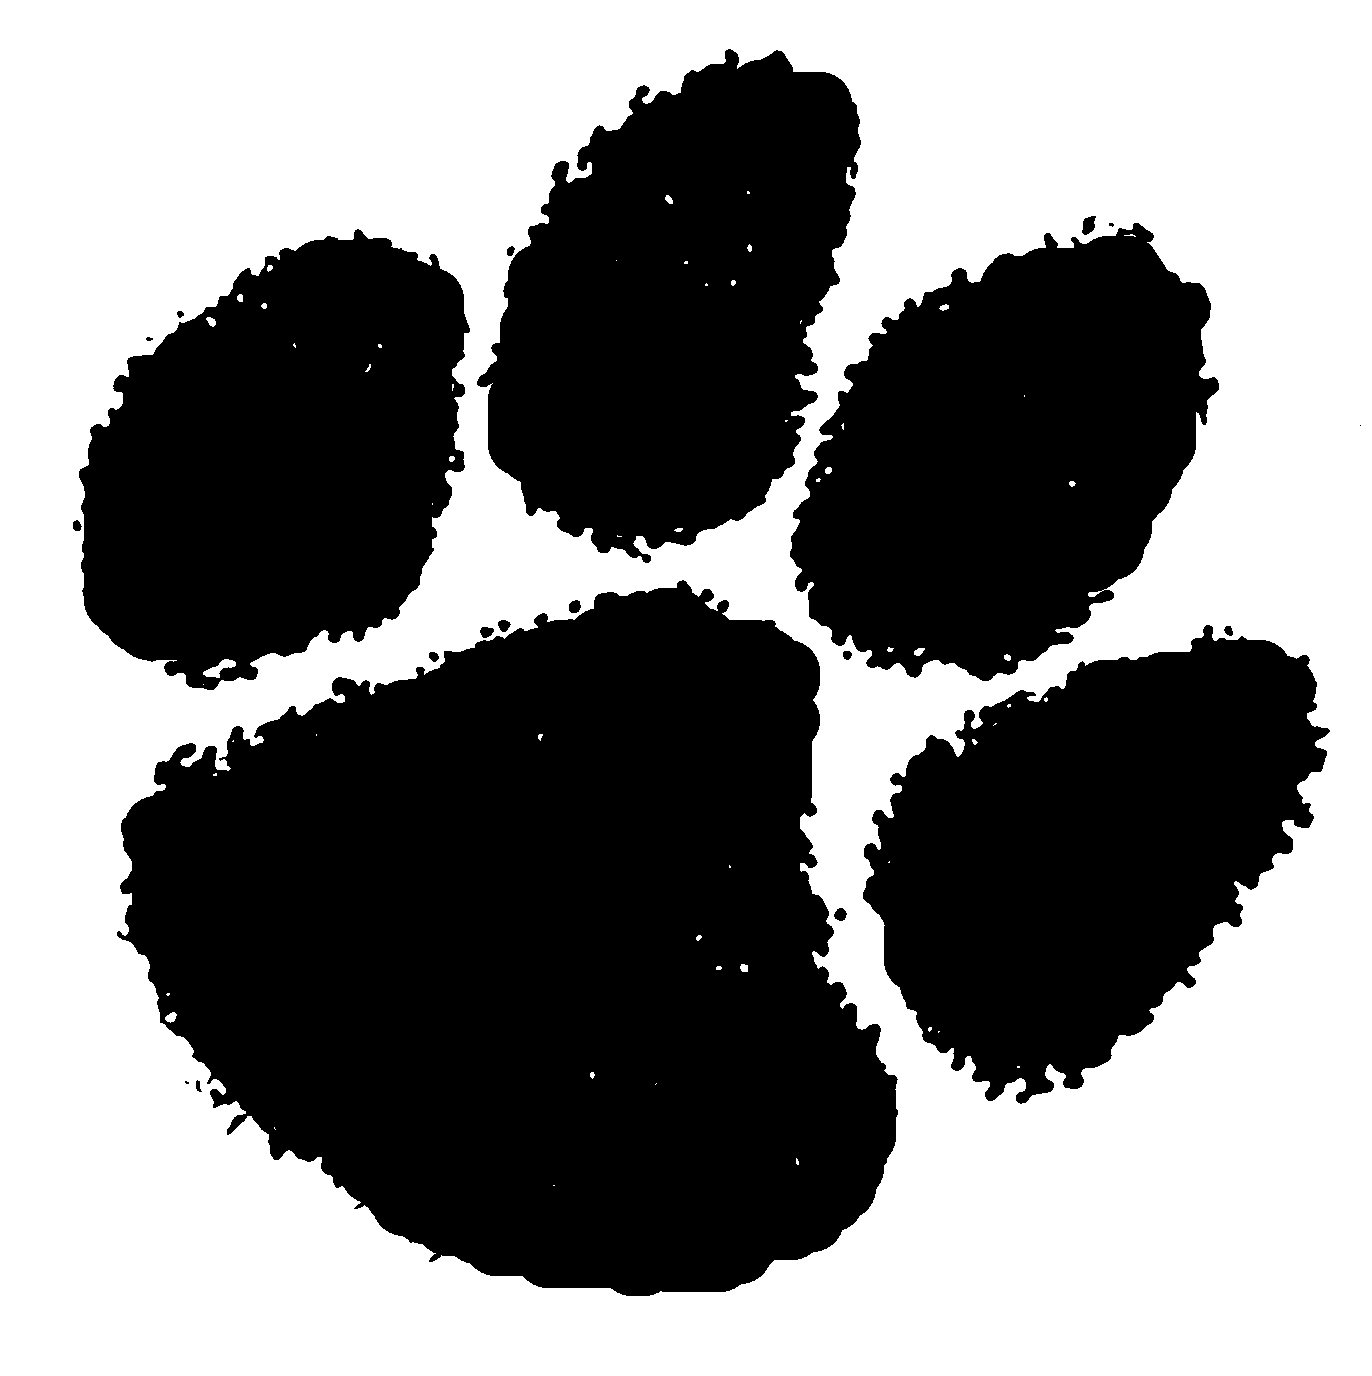 cougar paw print graphic